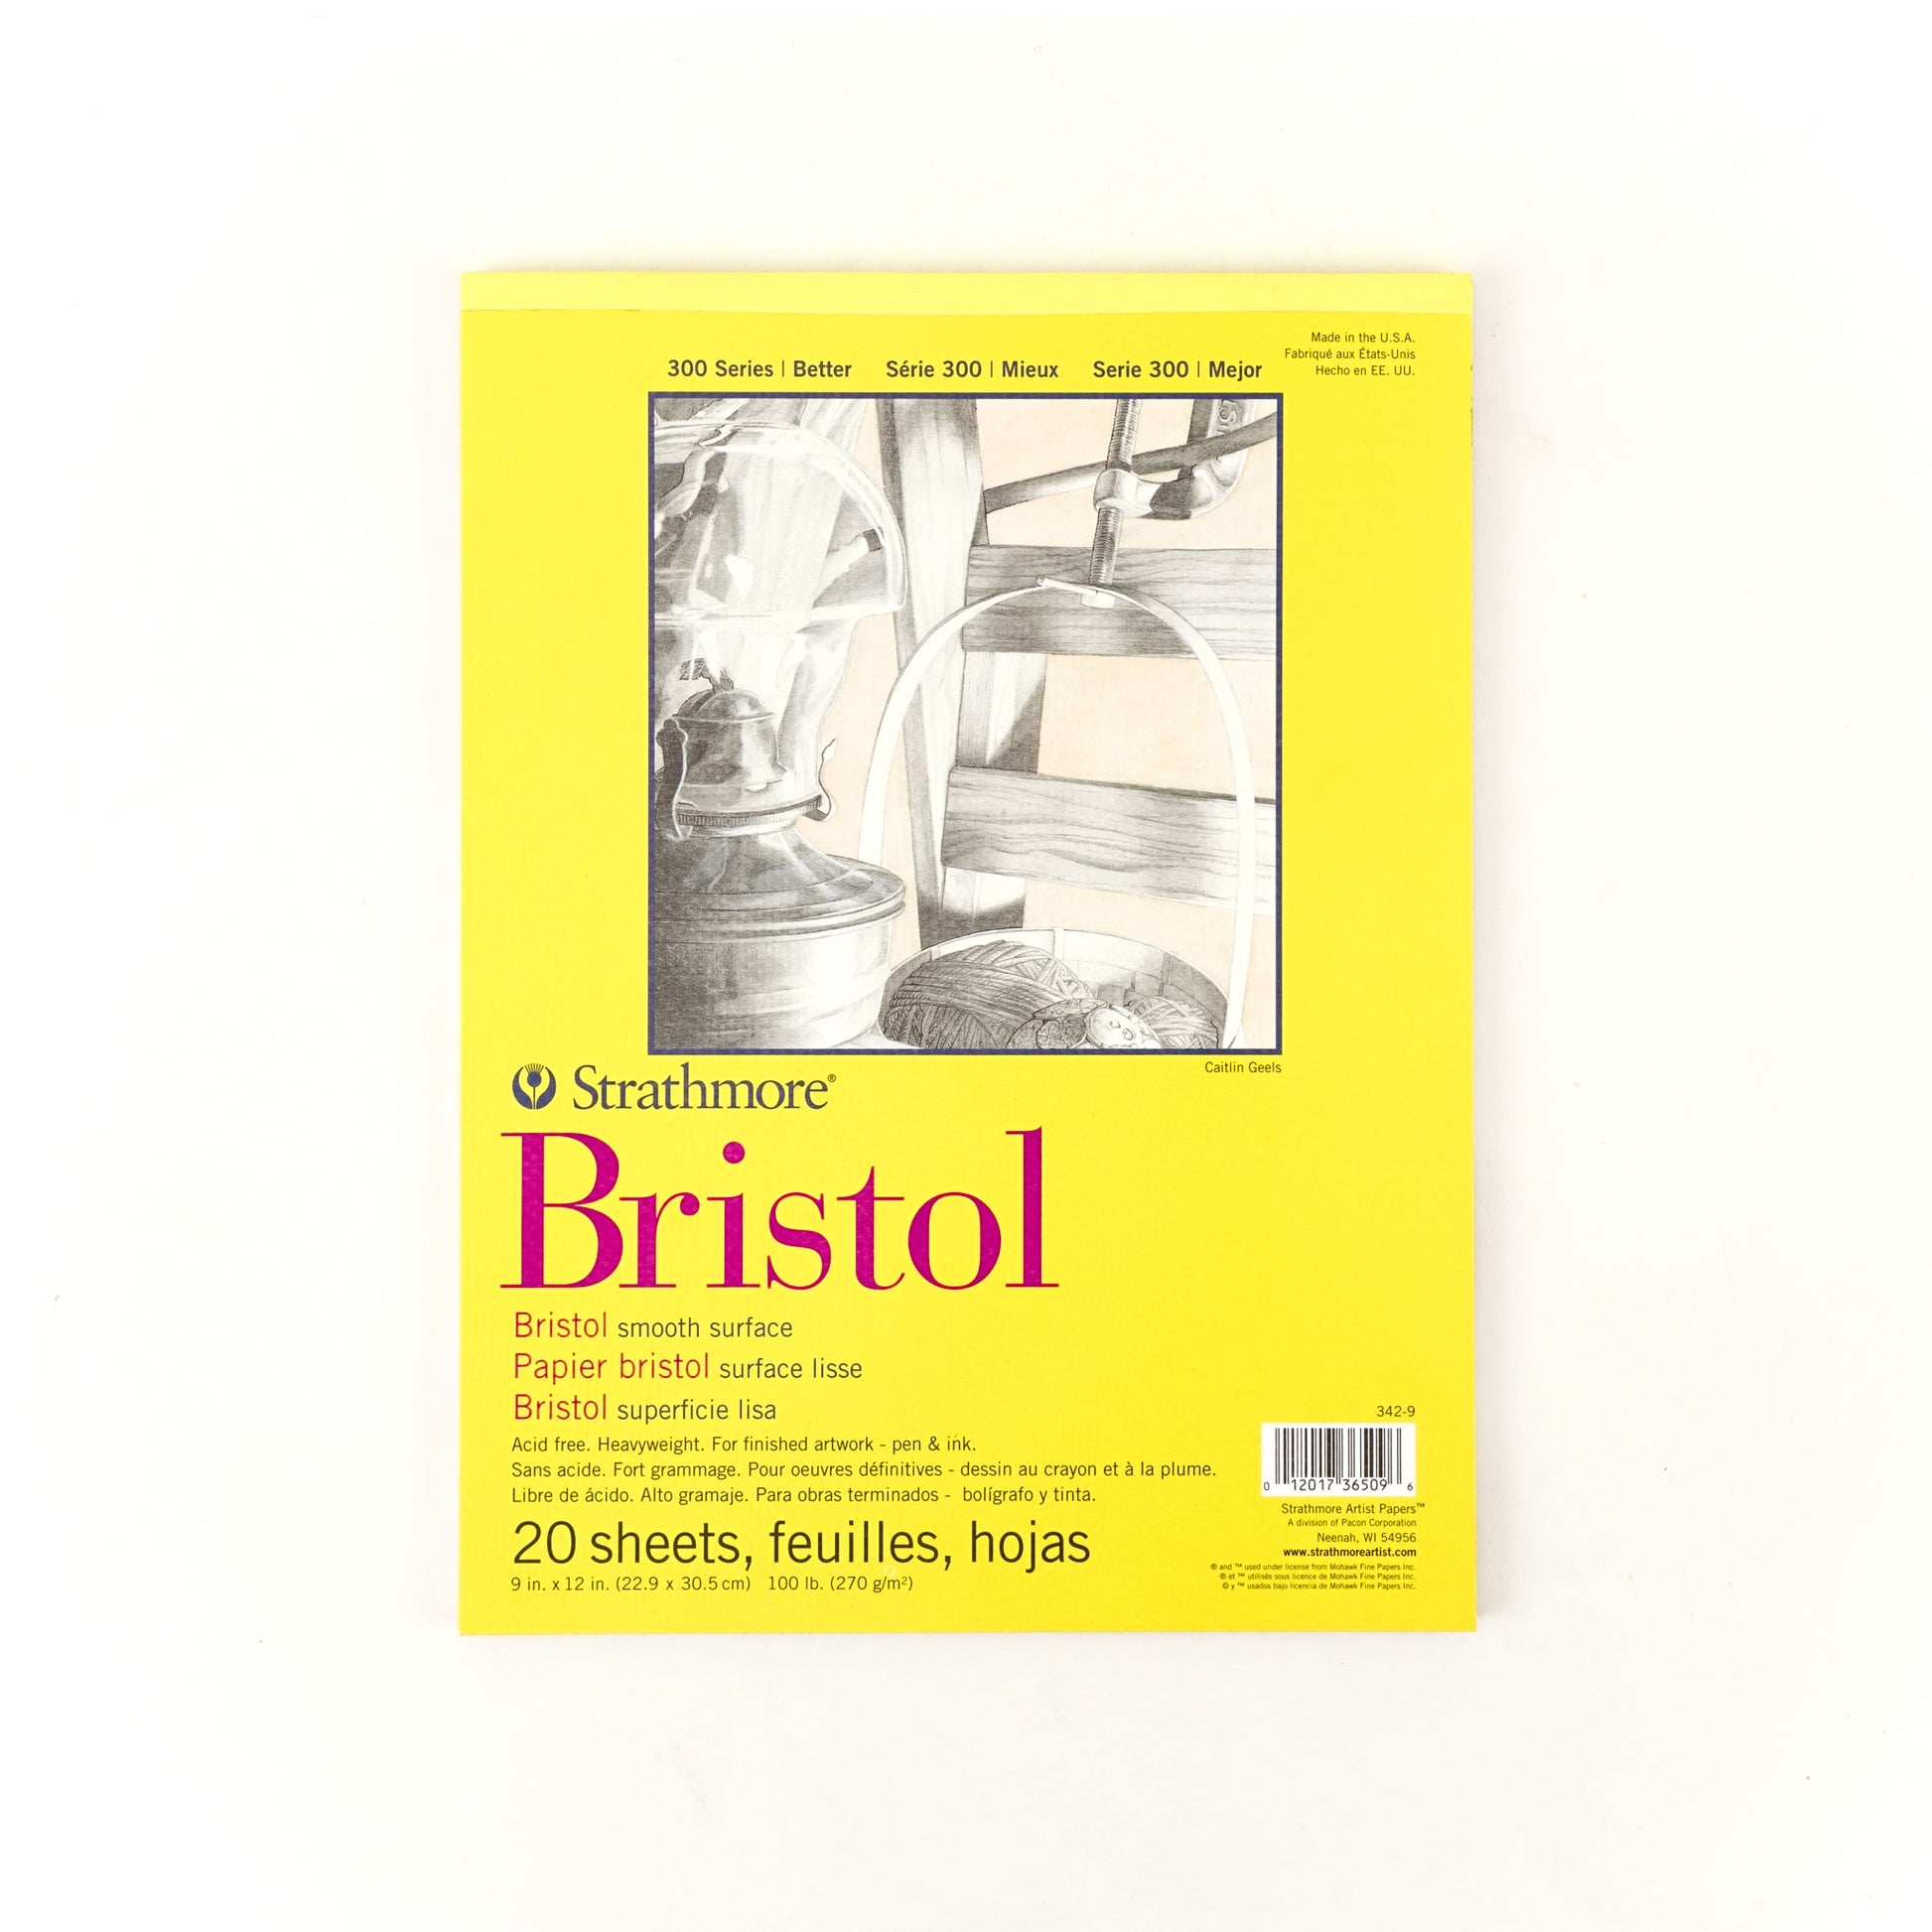 Strathmore 300 Series Bristol Paper Pad - Smooth Surface - 9 x 12 inches by Strathmore - K. A. Artist Shop